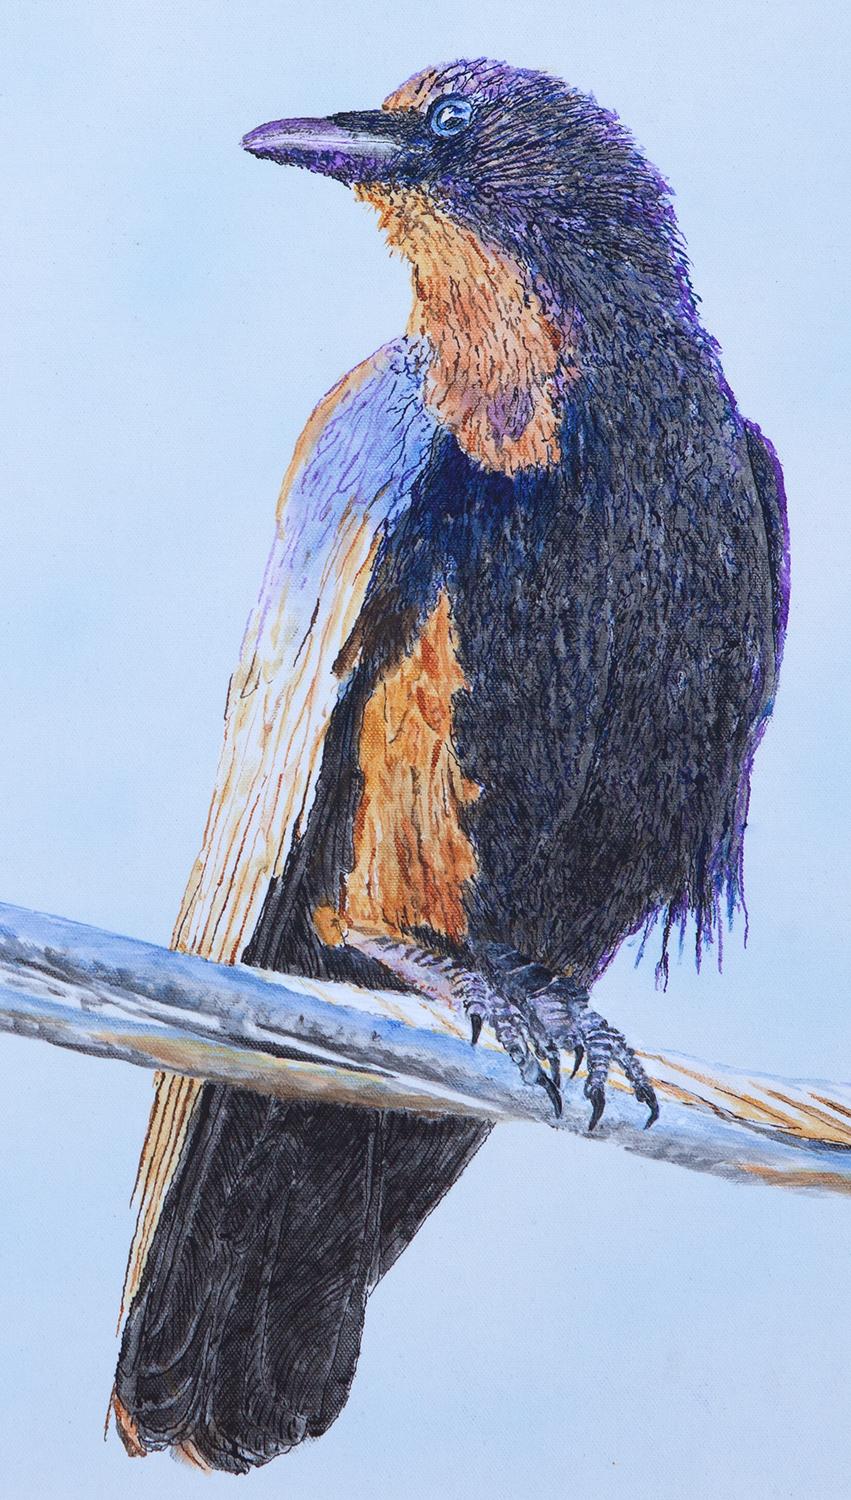 <p>Artist Comments<br>A realistic rendering by artist Emil Morhardt of a calm but vigilant crow on a powerline in the early morning sun. The bird is painted against a foggy blue sky gazing out into the distance. â€œThere was something peaceful about